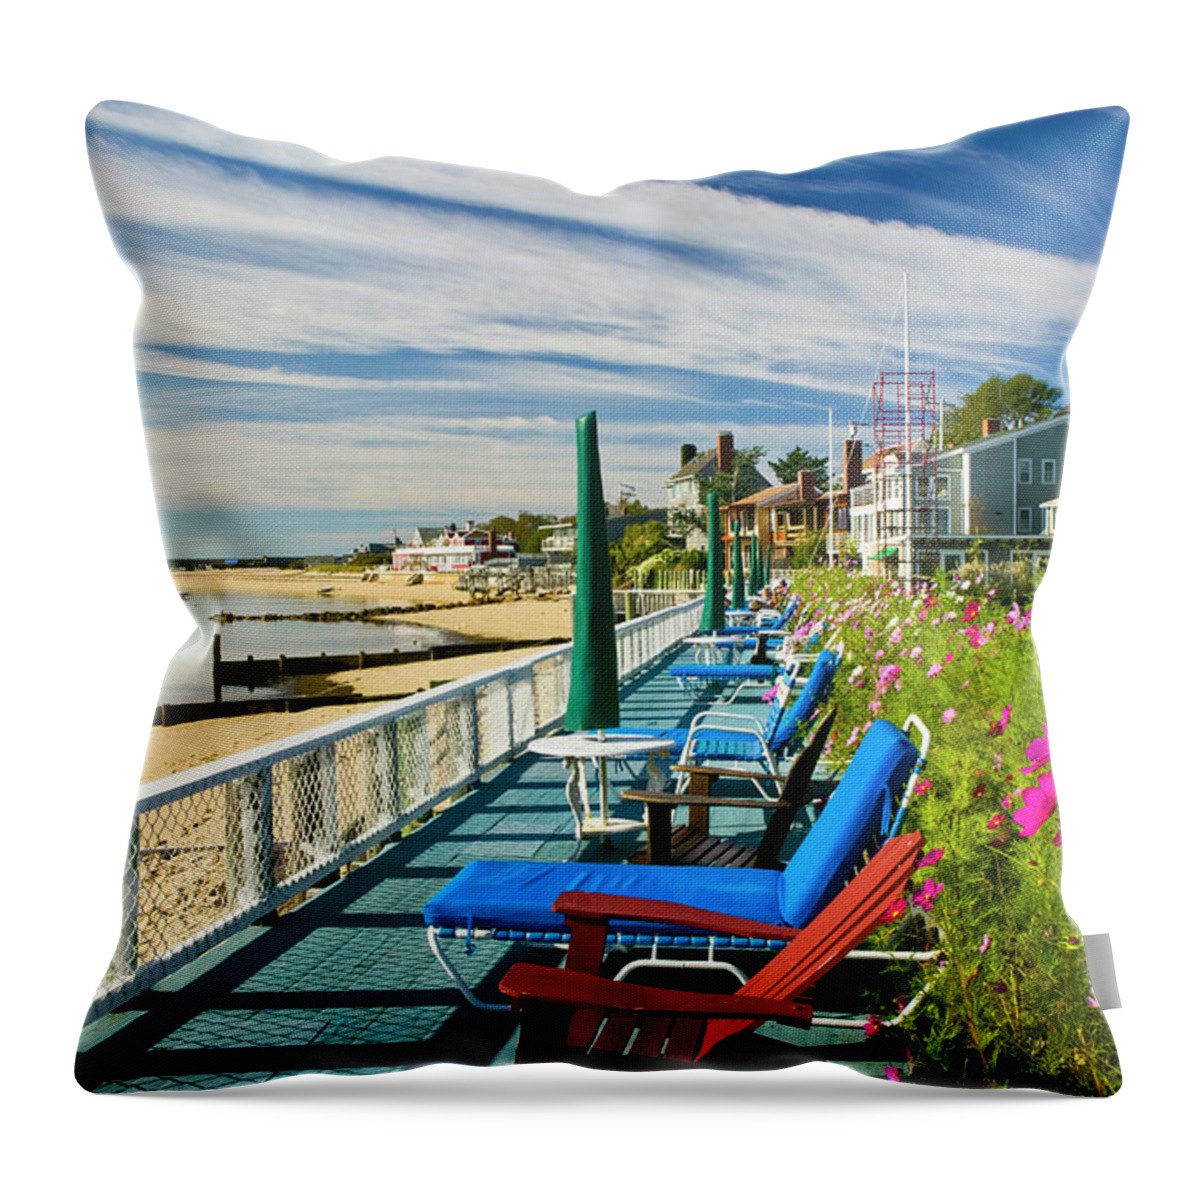 Estock Throw Pillow featuring the digital art Harbor, Provincetown, Cape Cod, Ma by Walter Bibikow